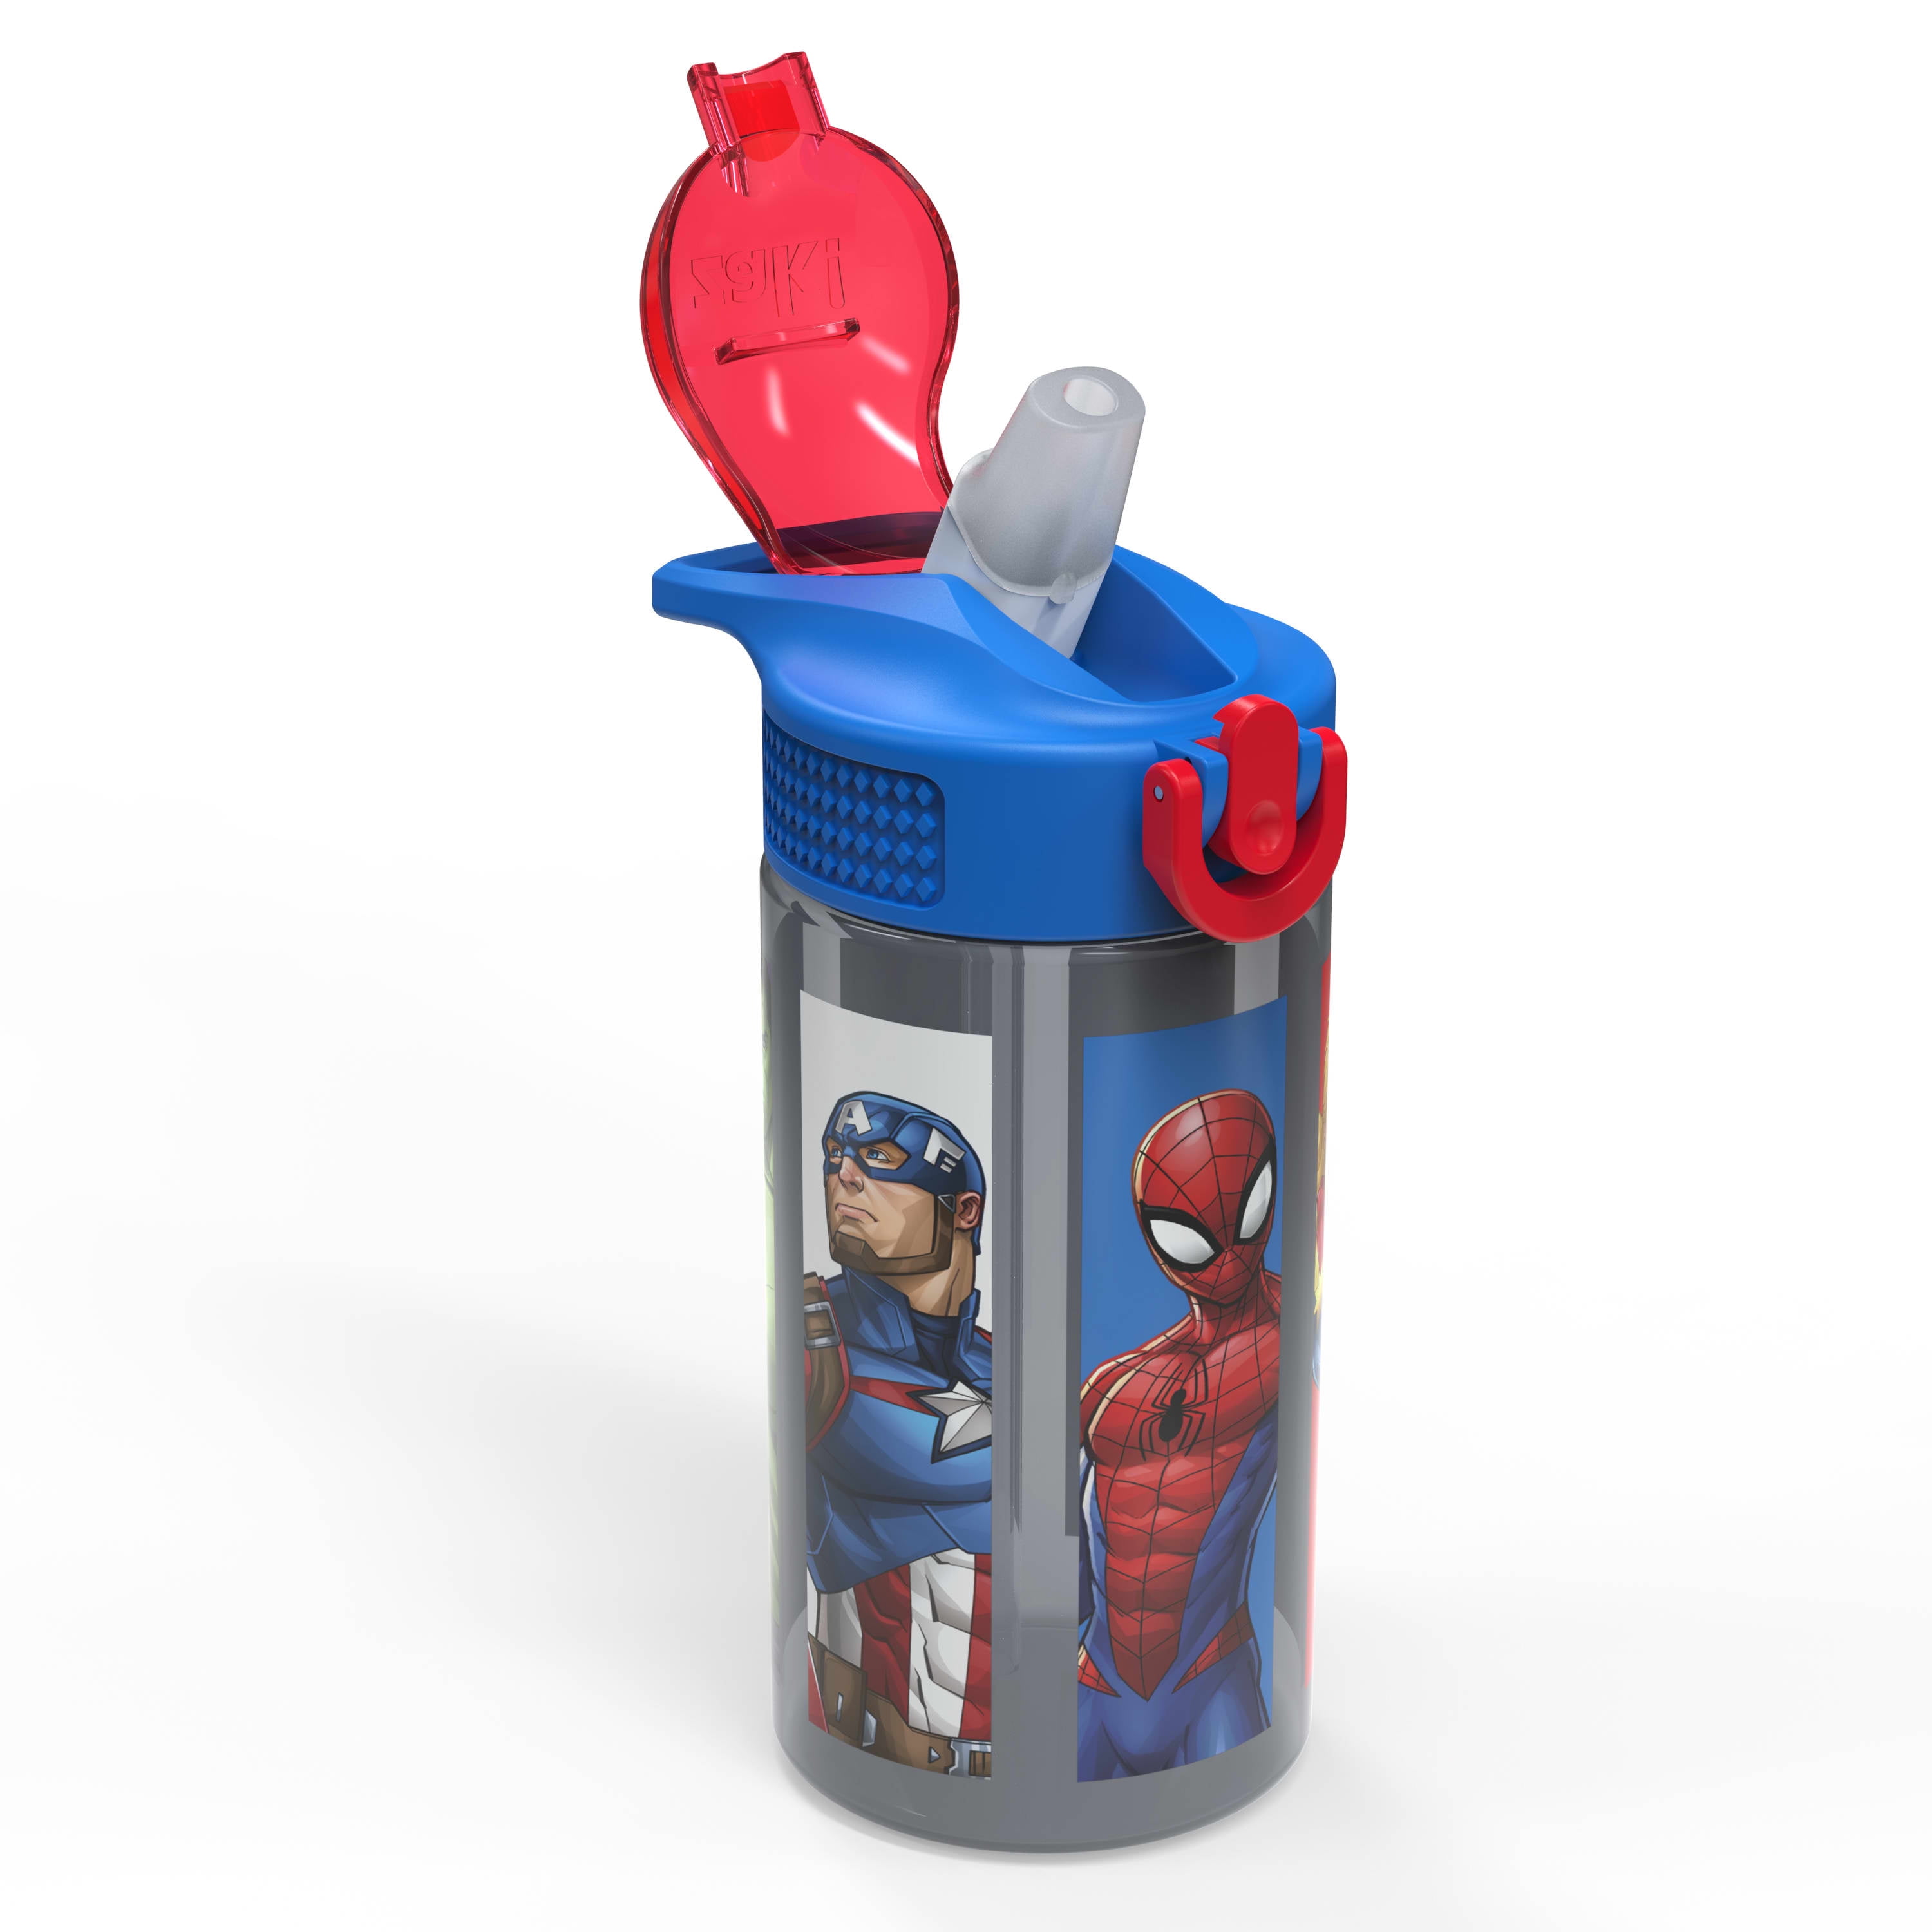 Buy Marvel Retro Character Collage 16 Oz. Uv Double-Wall Tritan Water Bottle